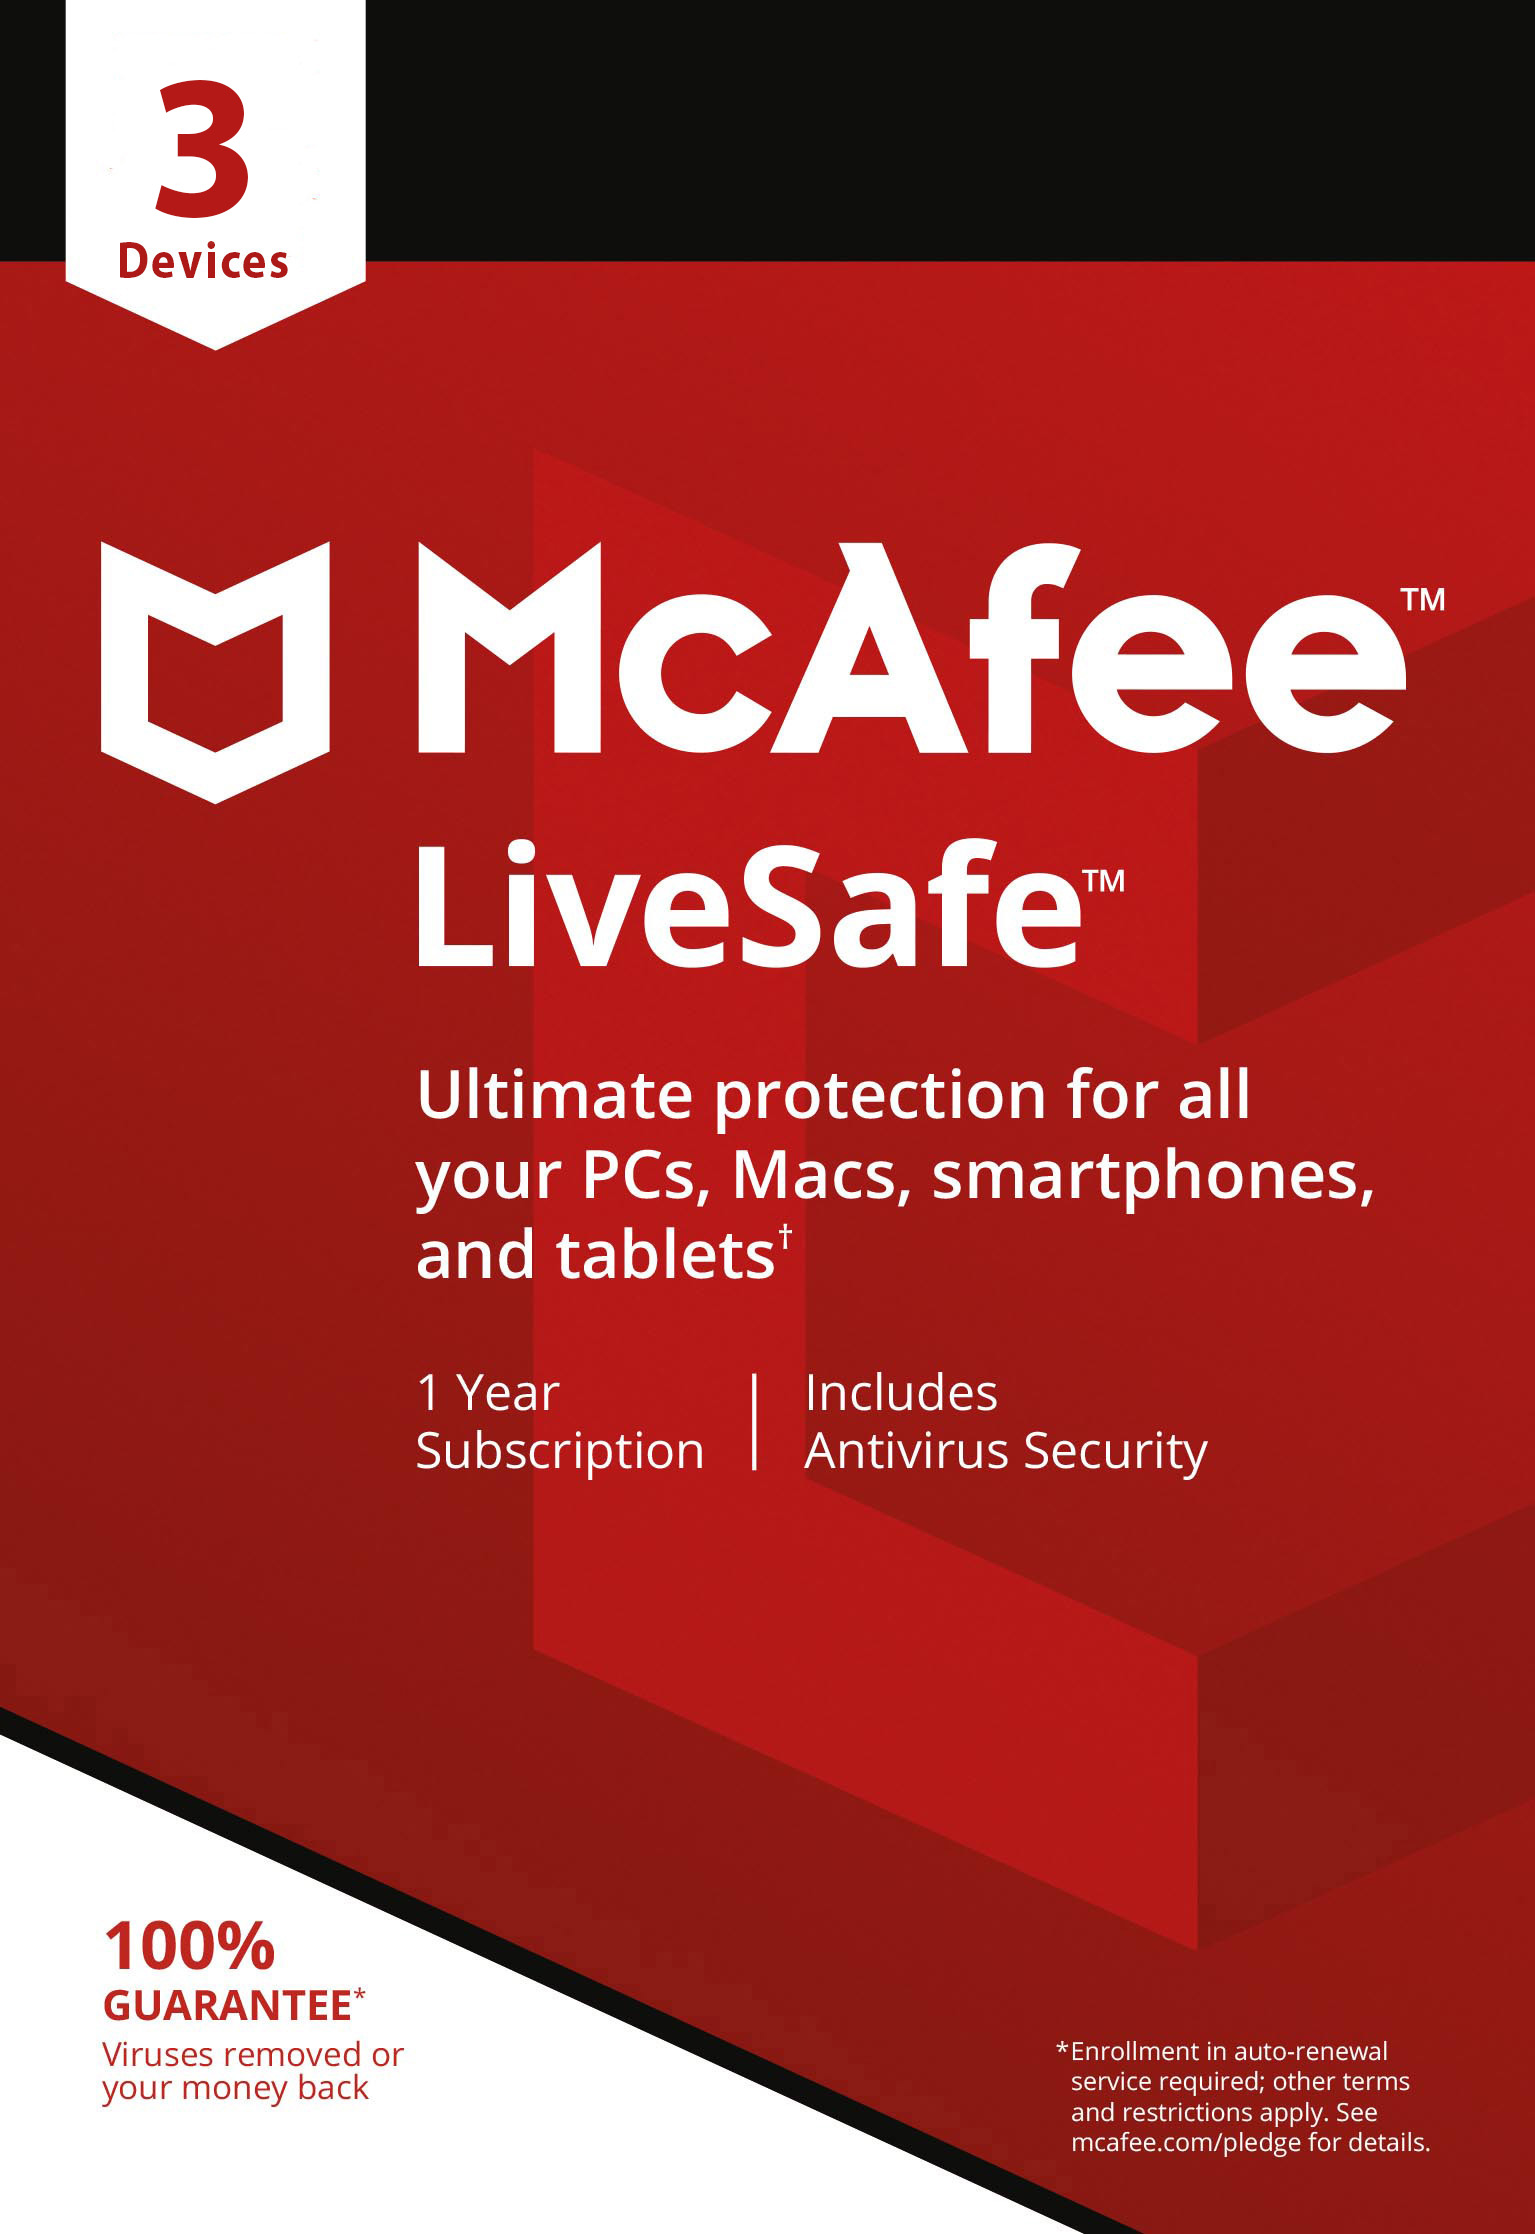 mcafee live safe 3 devices 1 year